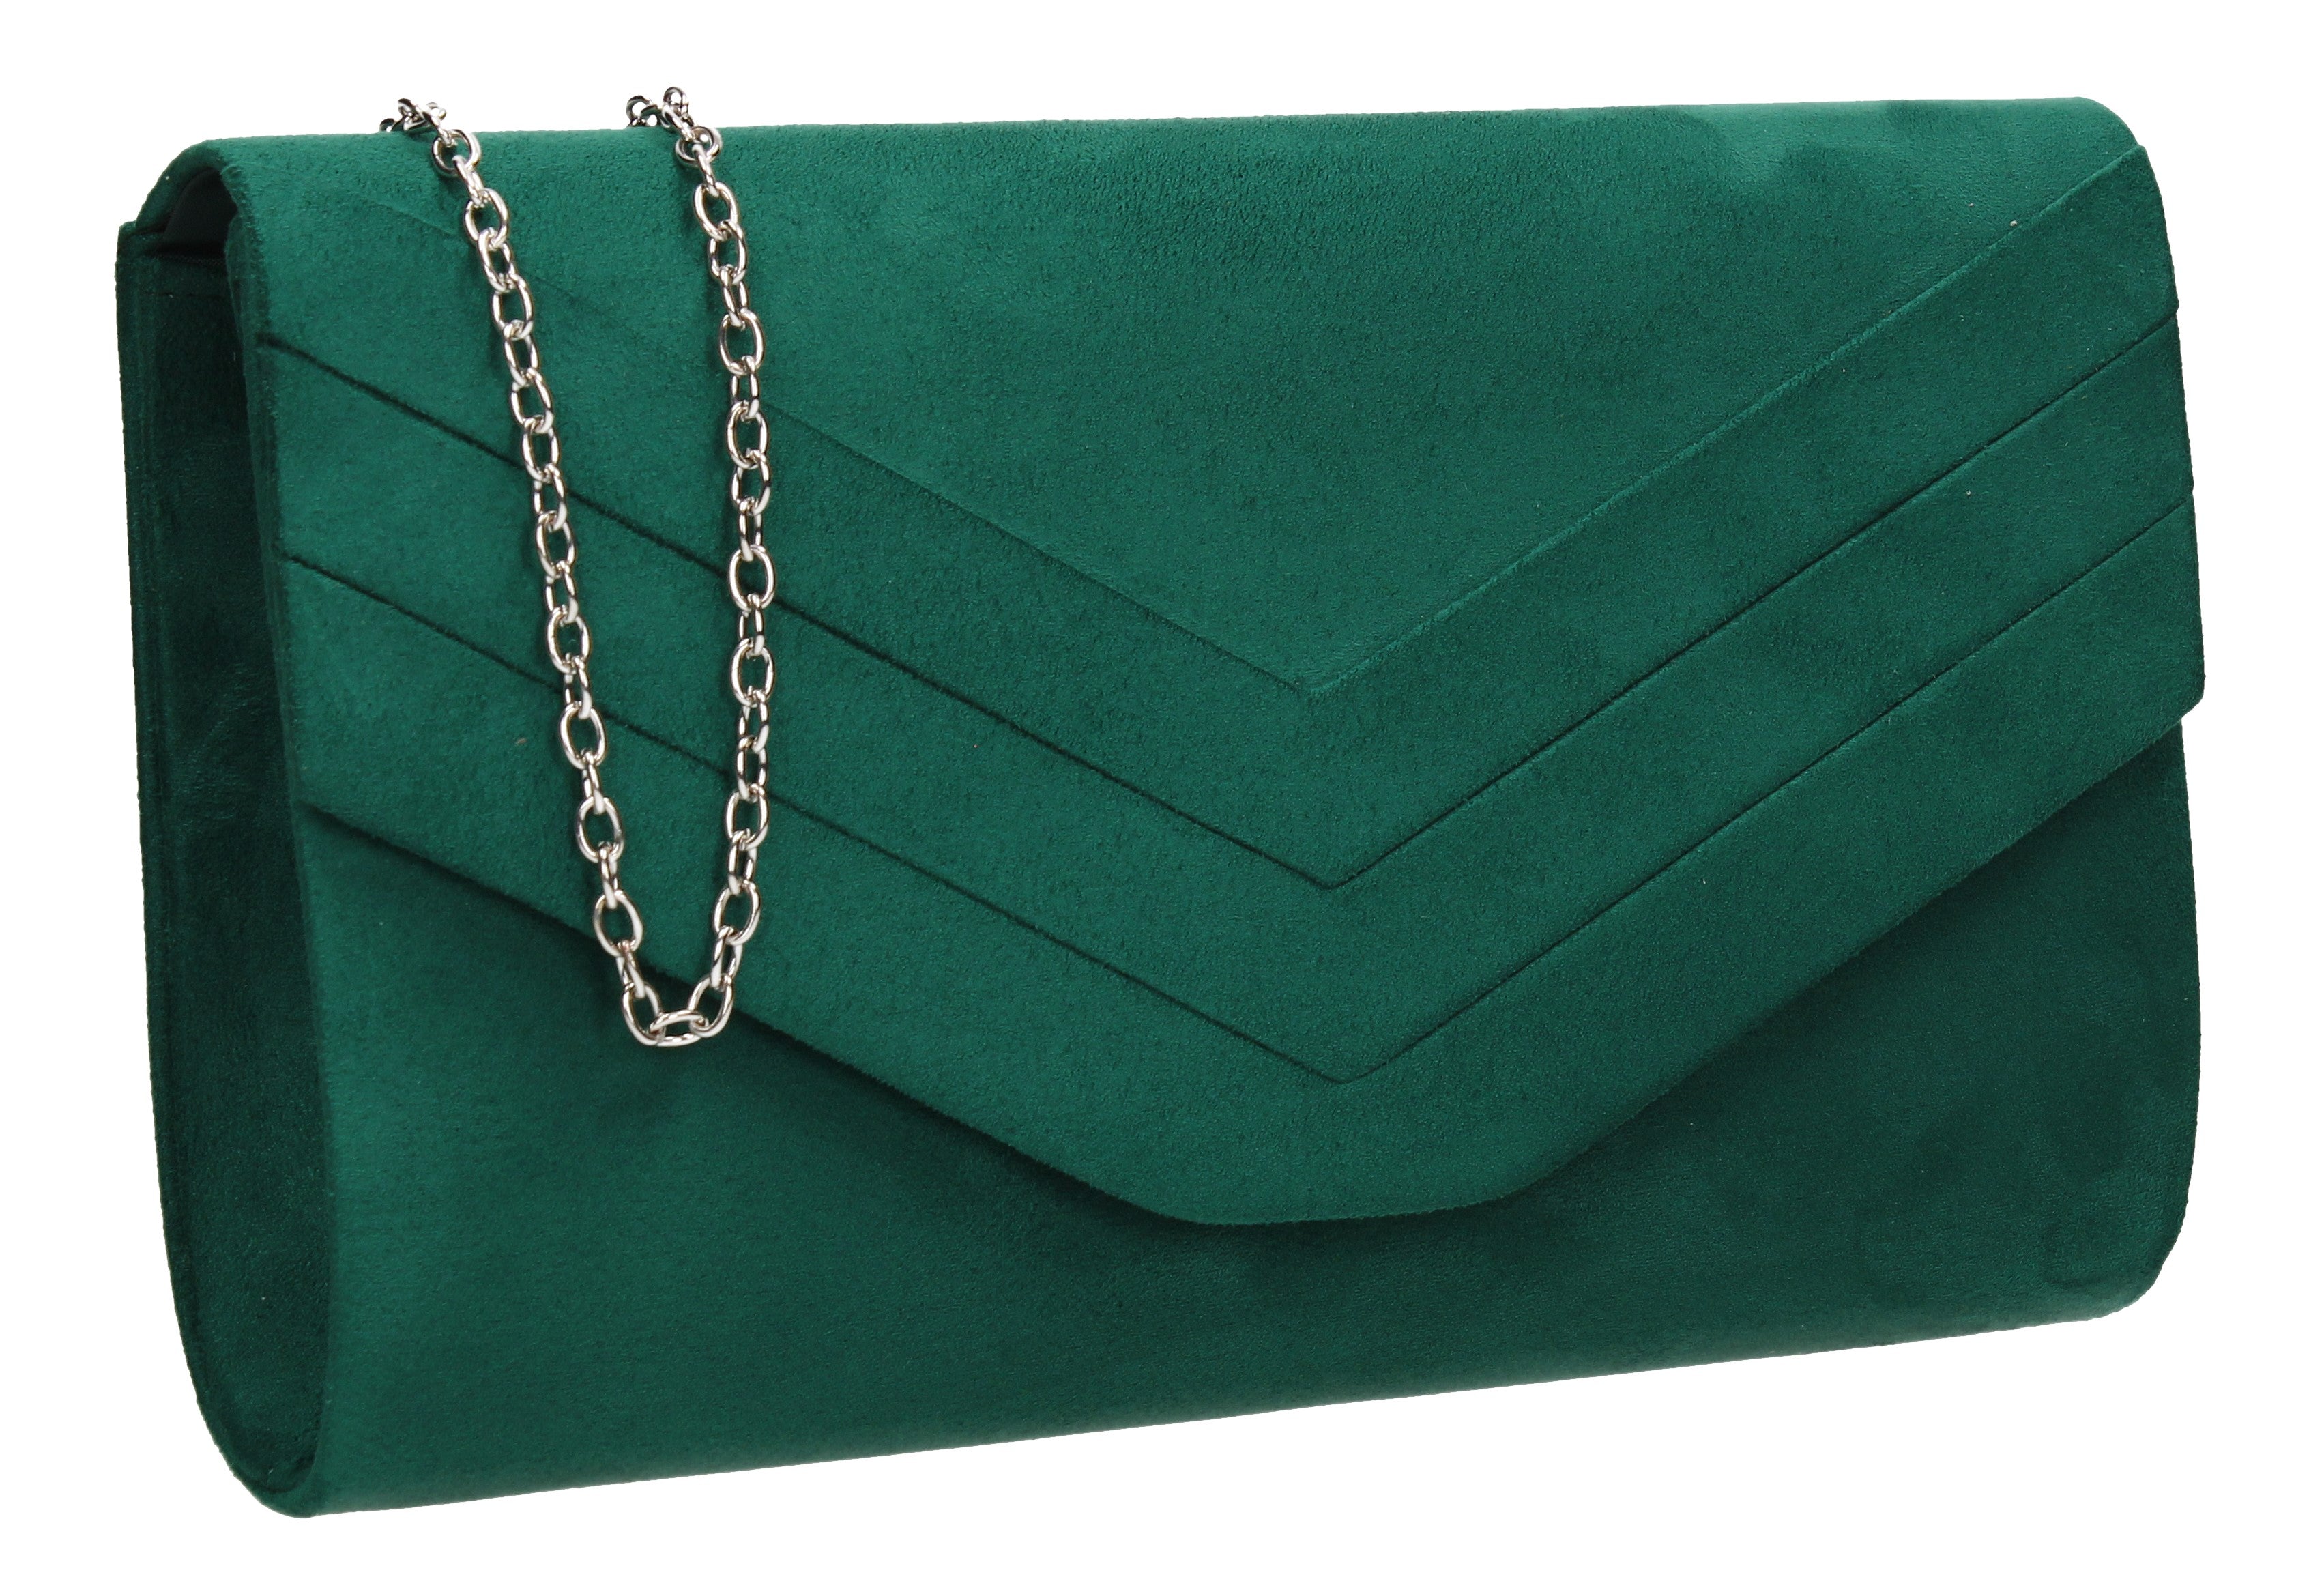 Green Clutch Bag, Evening Bag, Emerald Green Silk Purse With Chain - Etsy  UK | Green clutch bags, Green clutches, Bags